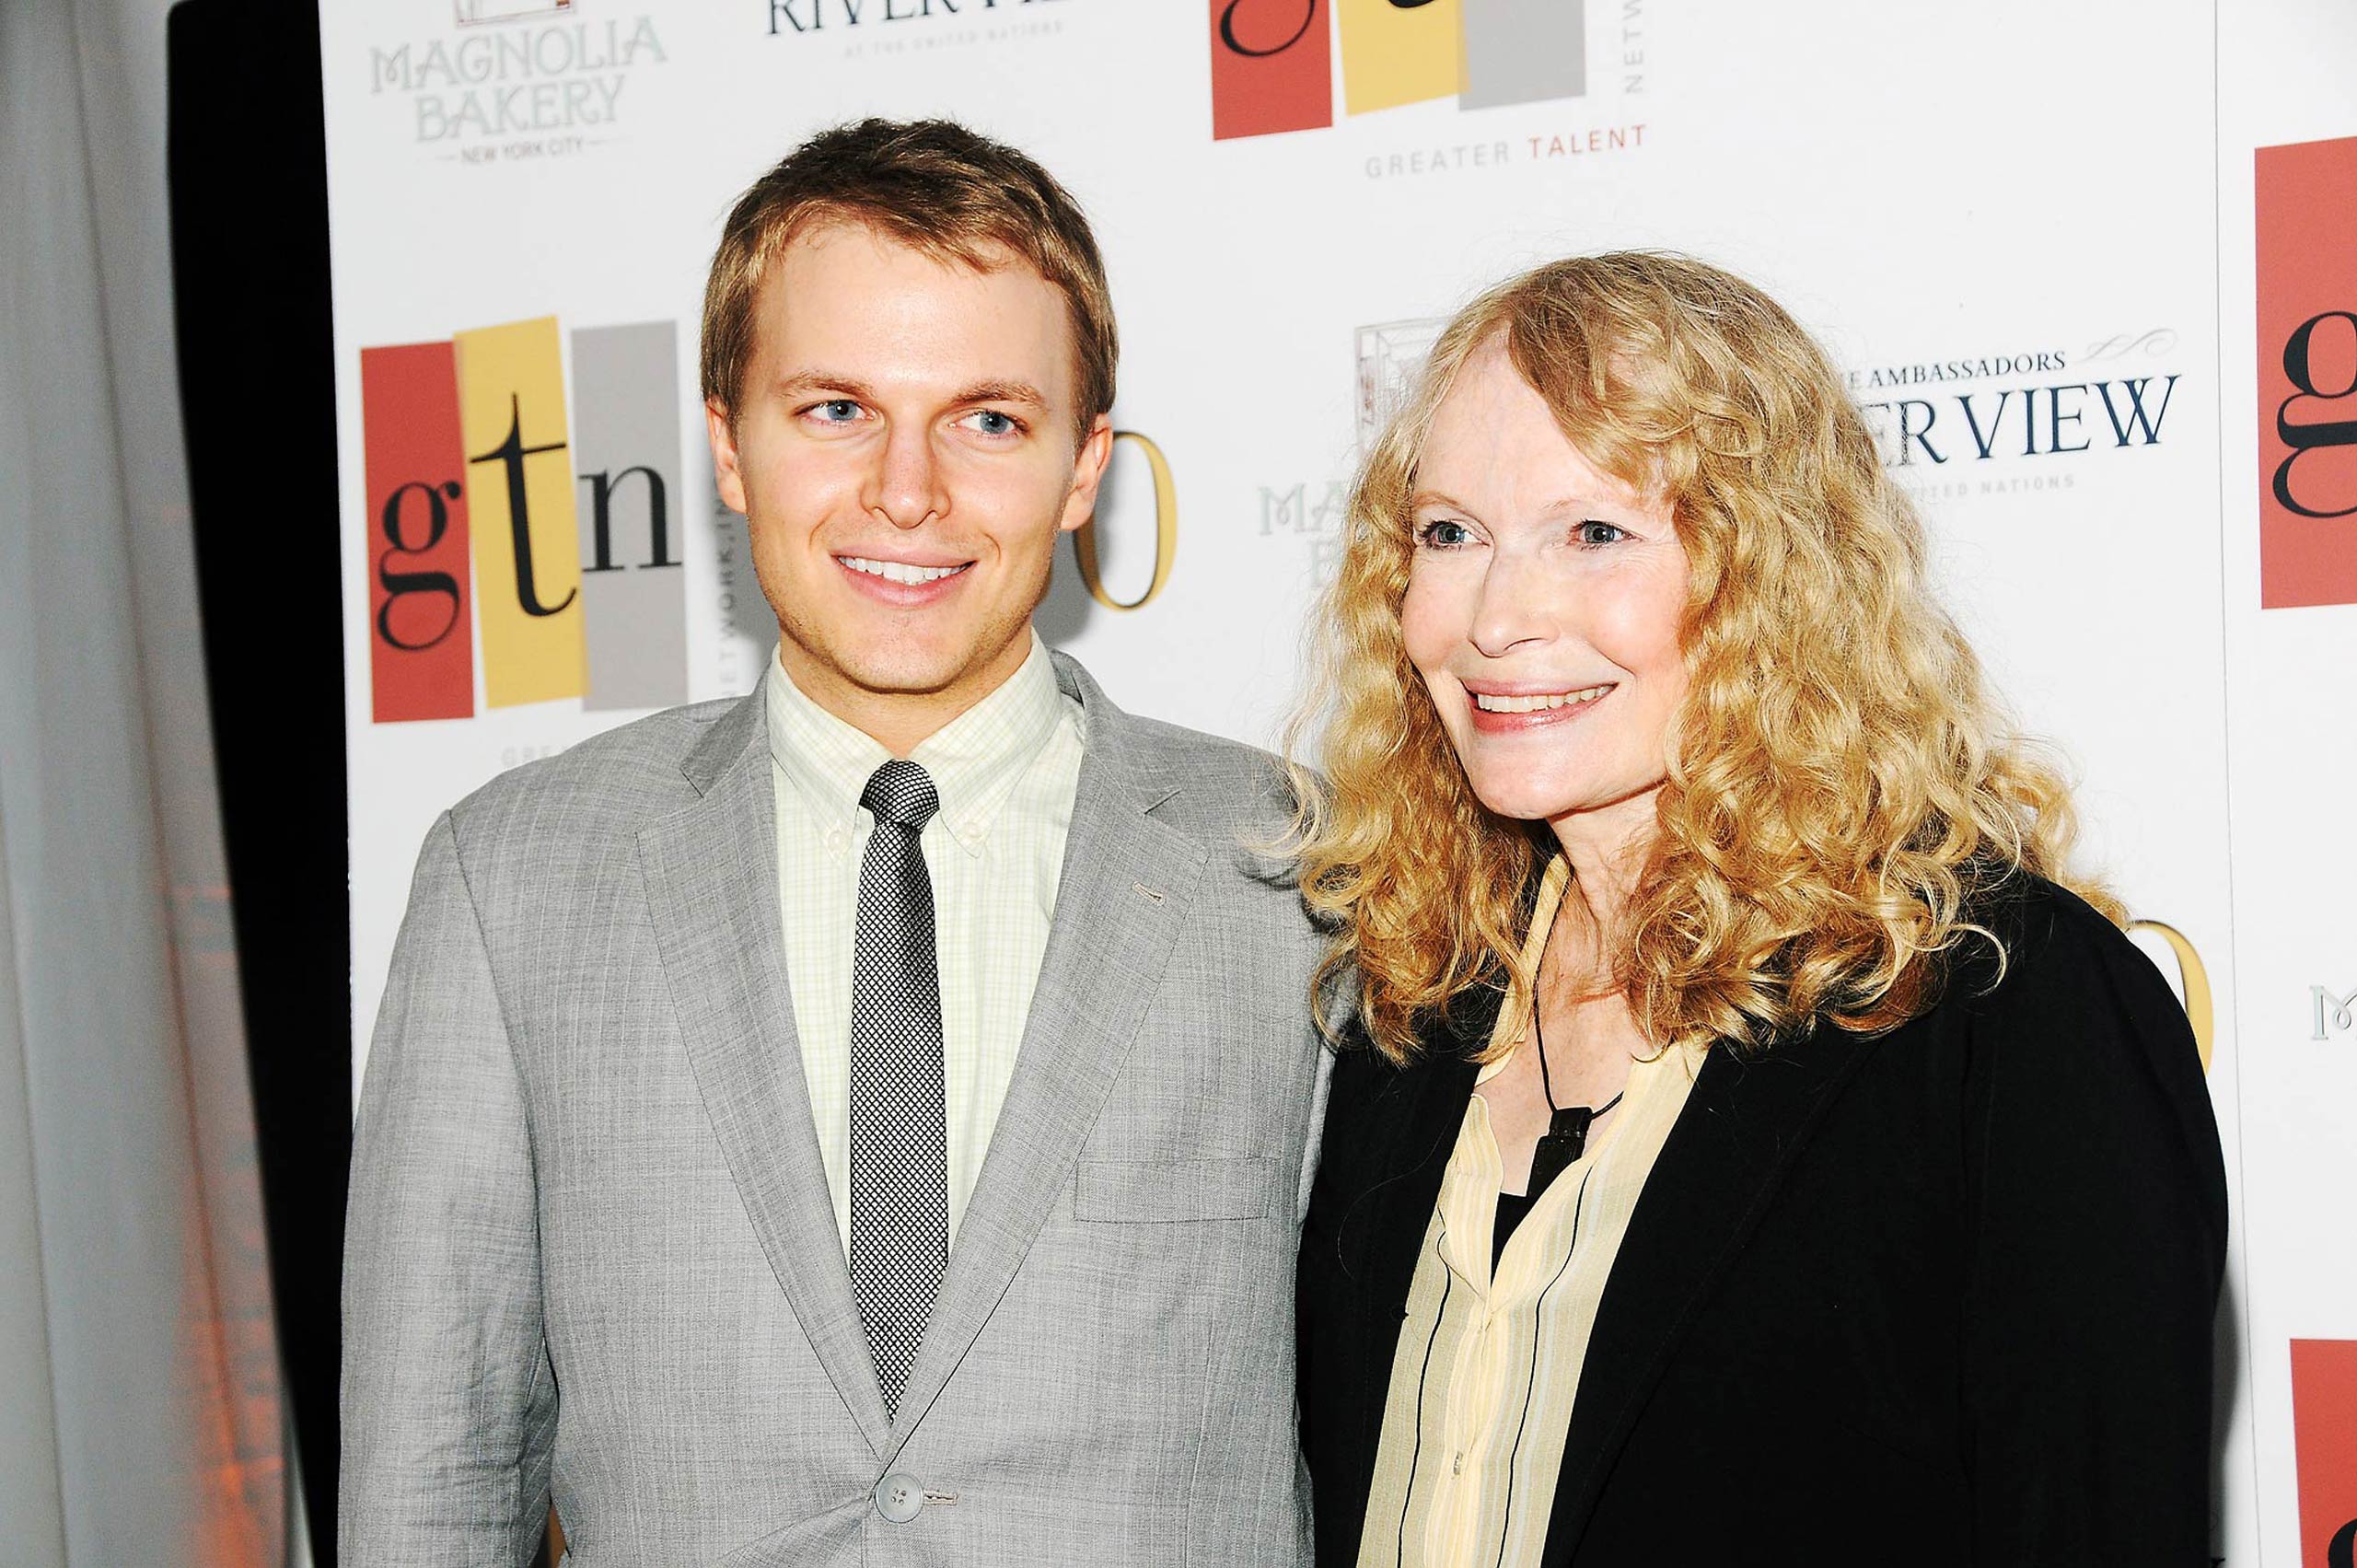 Ronan Farrow and his mother, Mia Farrow, attend the Greater Talent Network's 30th anniversary at the Ambassadors River View at the United Nations on May 2, 2012 in New York City.